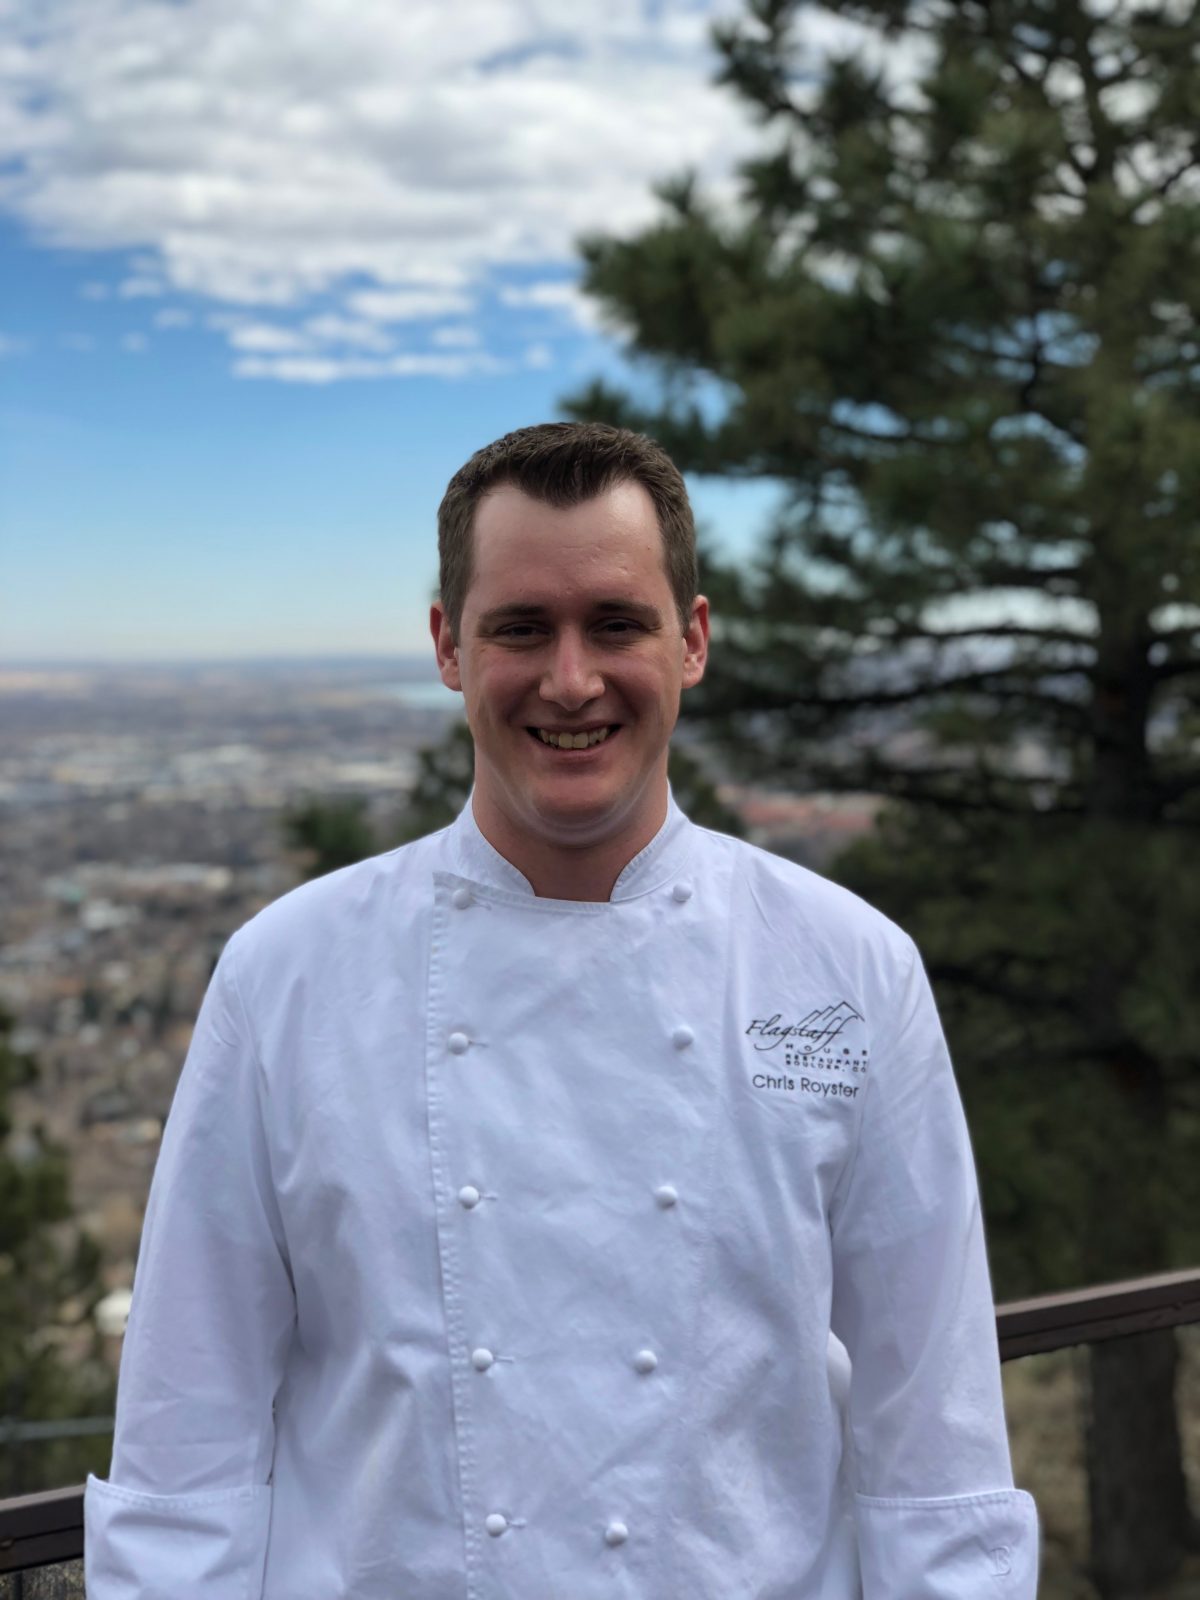 Colorado Meetings and Events: Chris Royster and Adam Monette Take on New Roles at Flagstaff House Restaurant